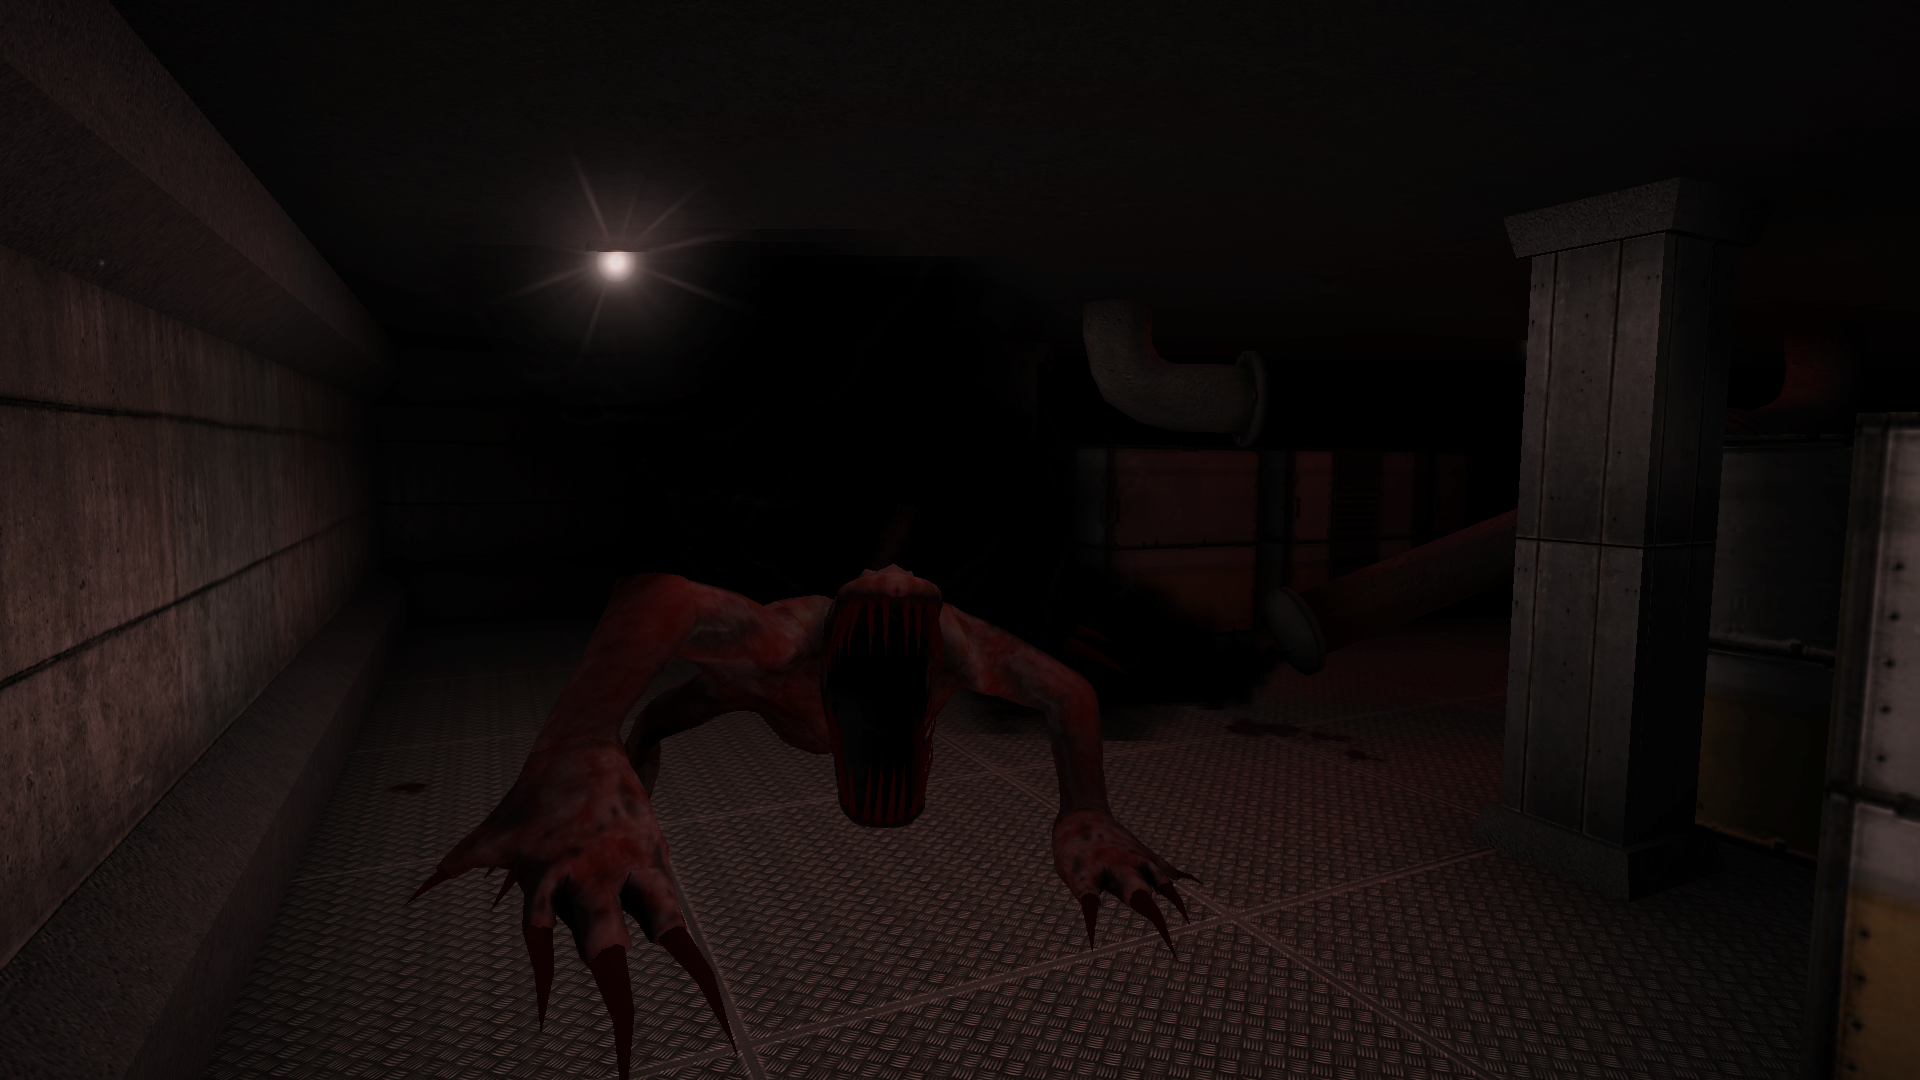 download scp containment breach multiplayer for free